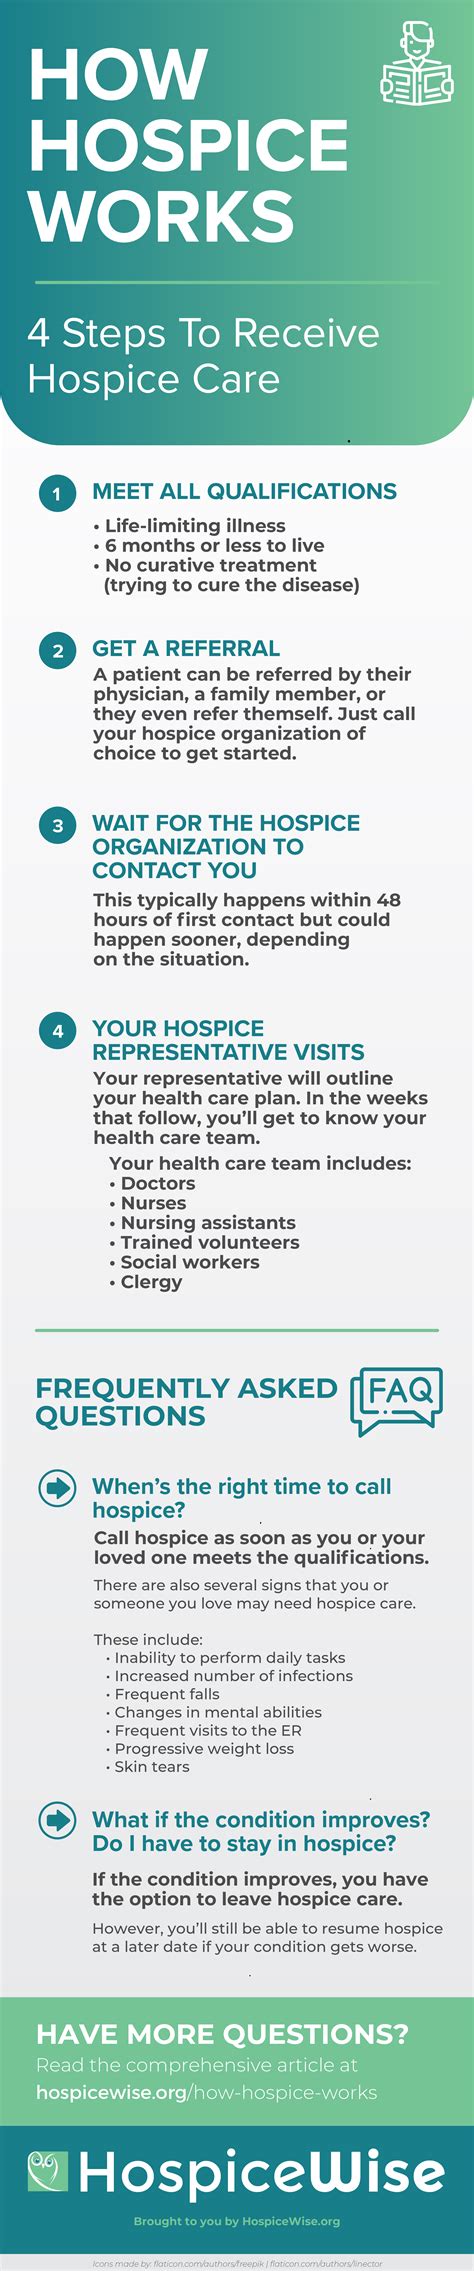 How Does Hospice Work Infographic 4 Steps To Get Hospice Care